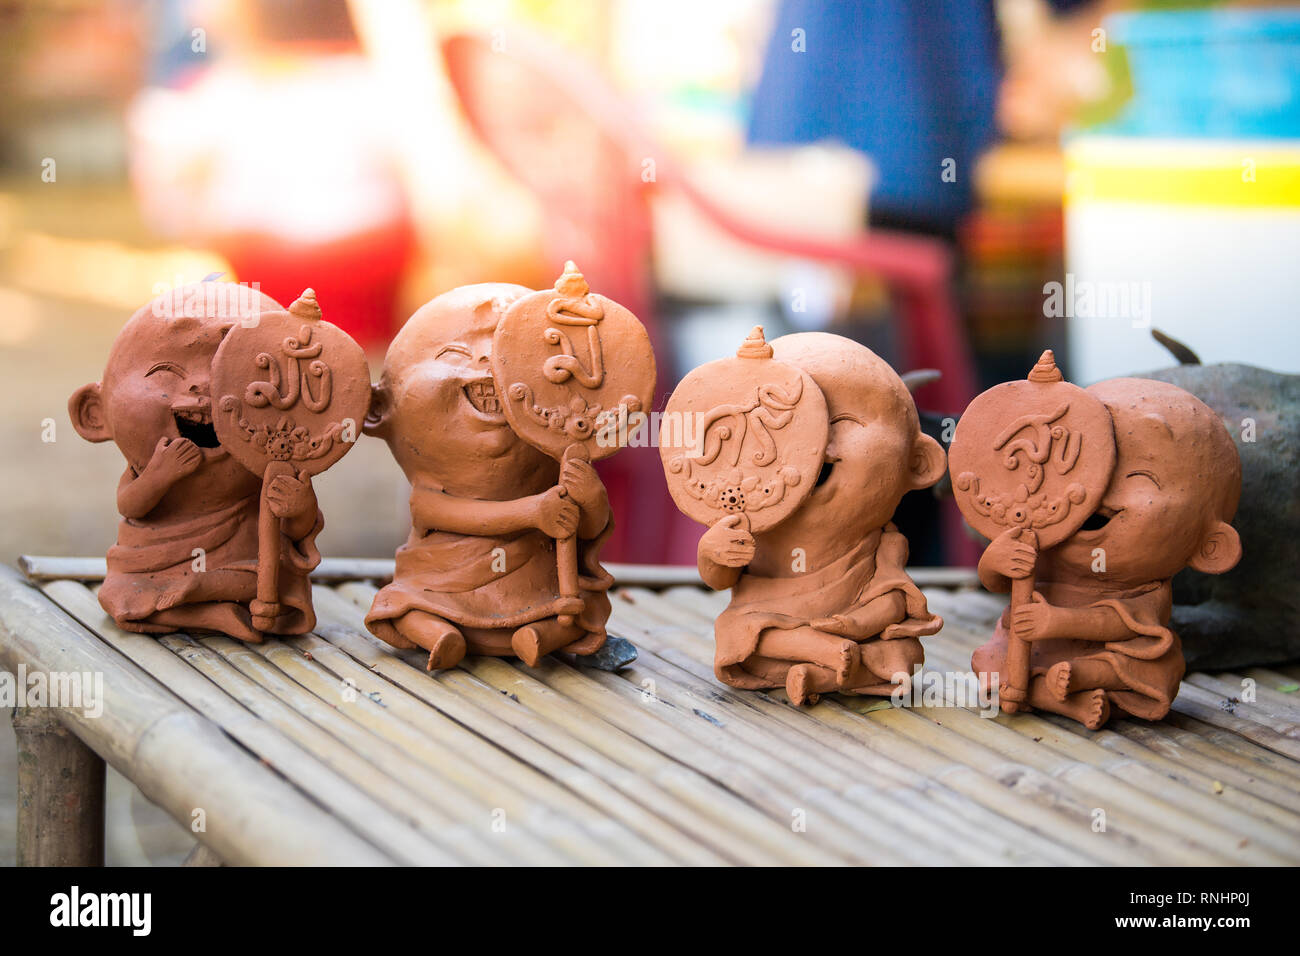 Clay doll on bamboo table. Stock Photo